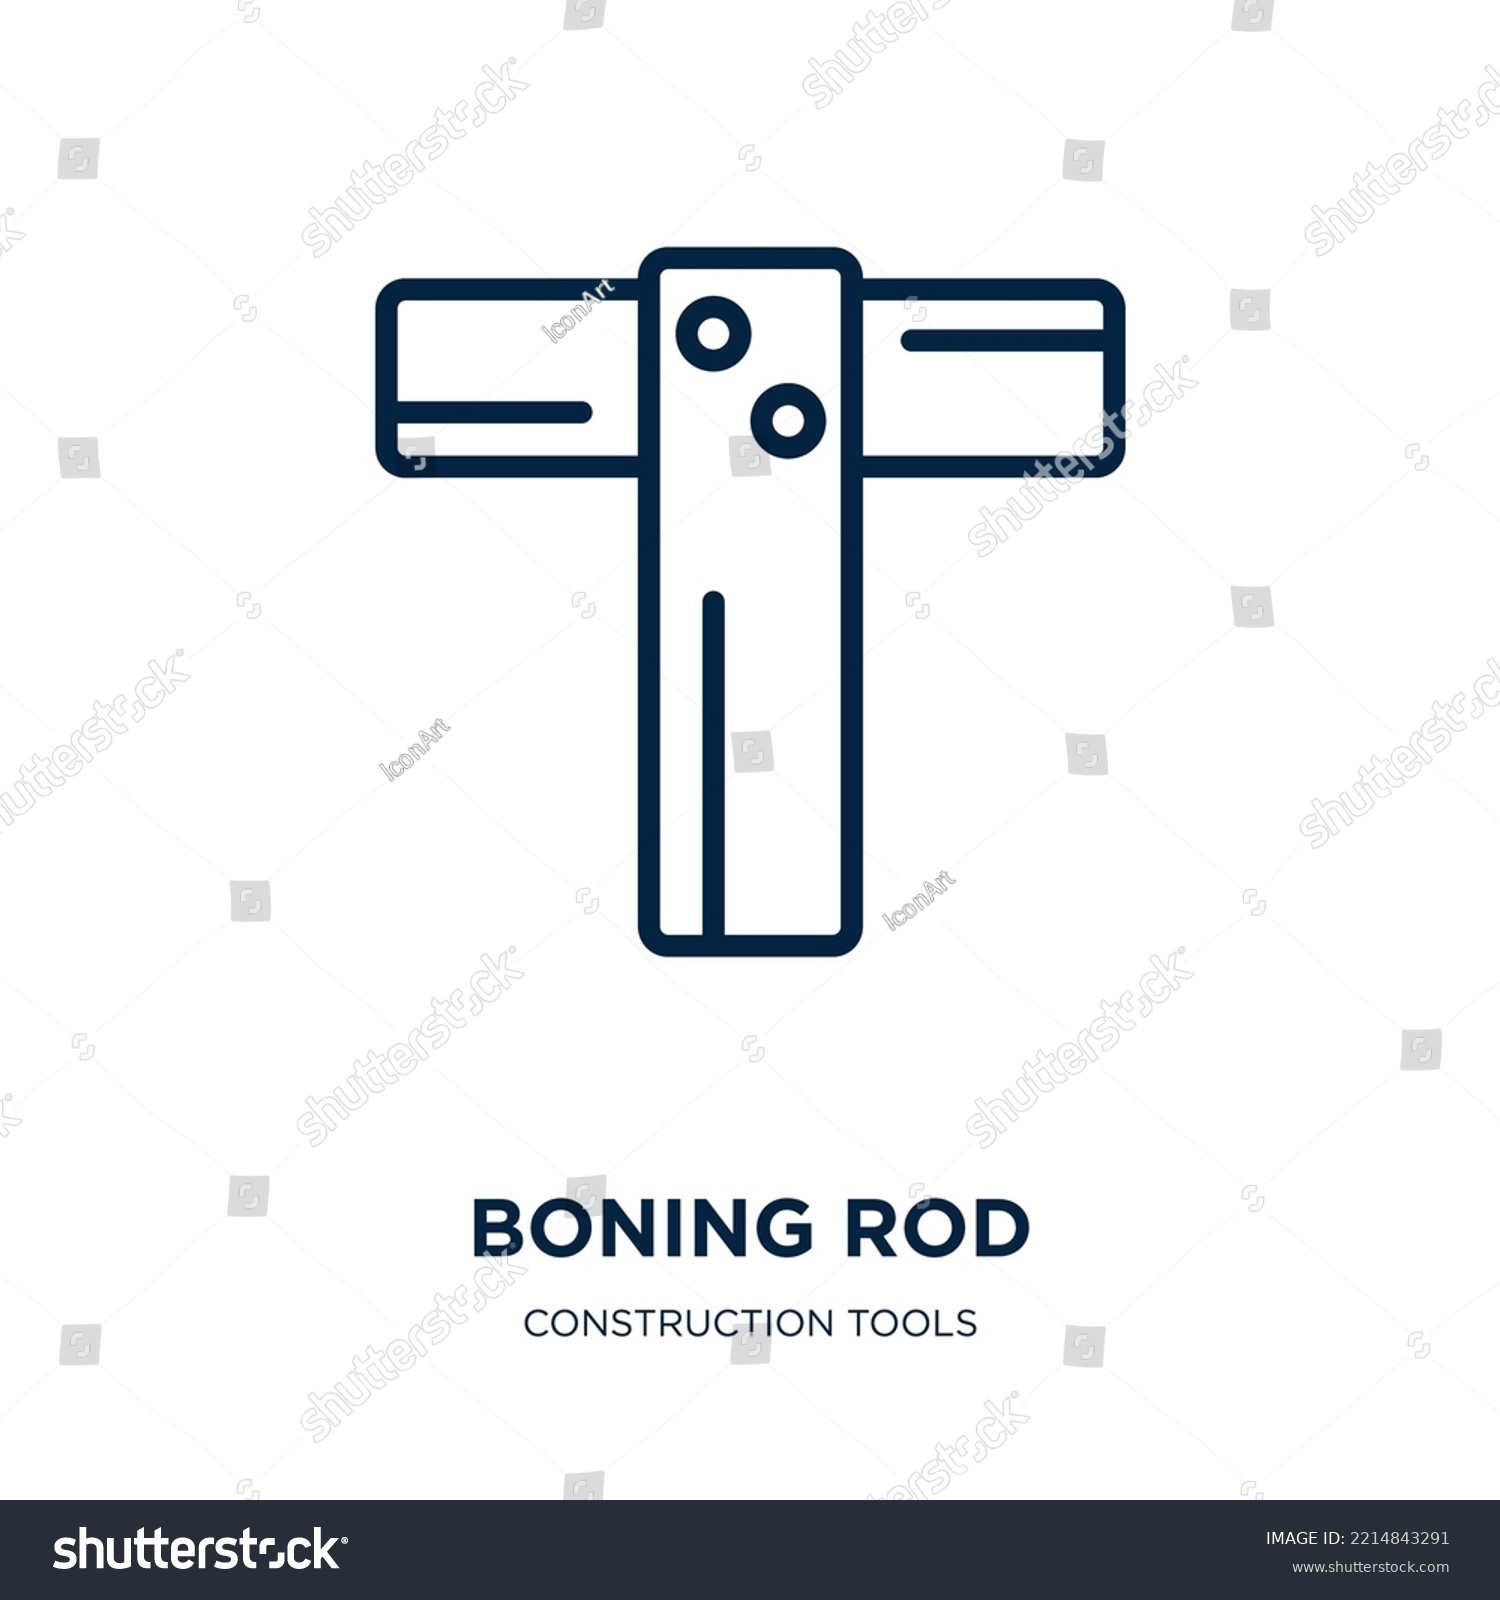 SVG of boning rod icon from construction tools collection. Thin linear boning rod, bone, rod outline icon isolated on white background. Line vector boning rod sign, symbol for web and mobile svg